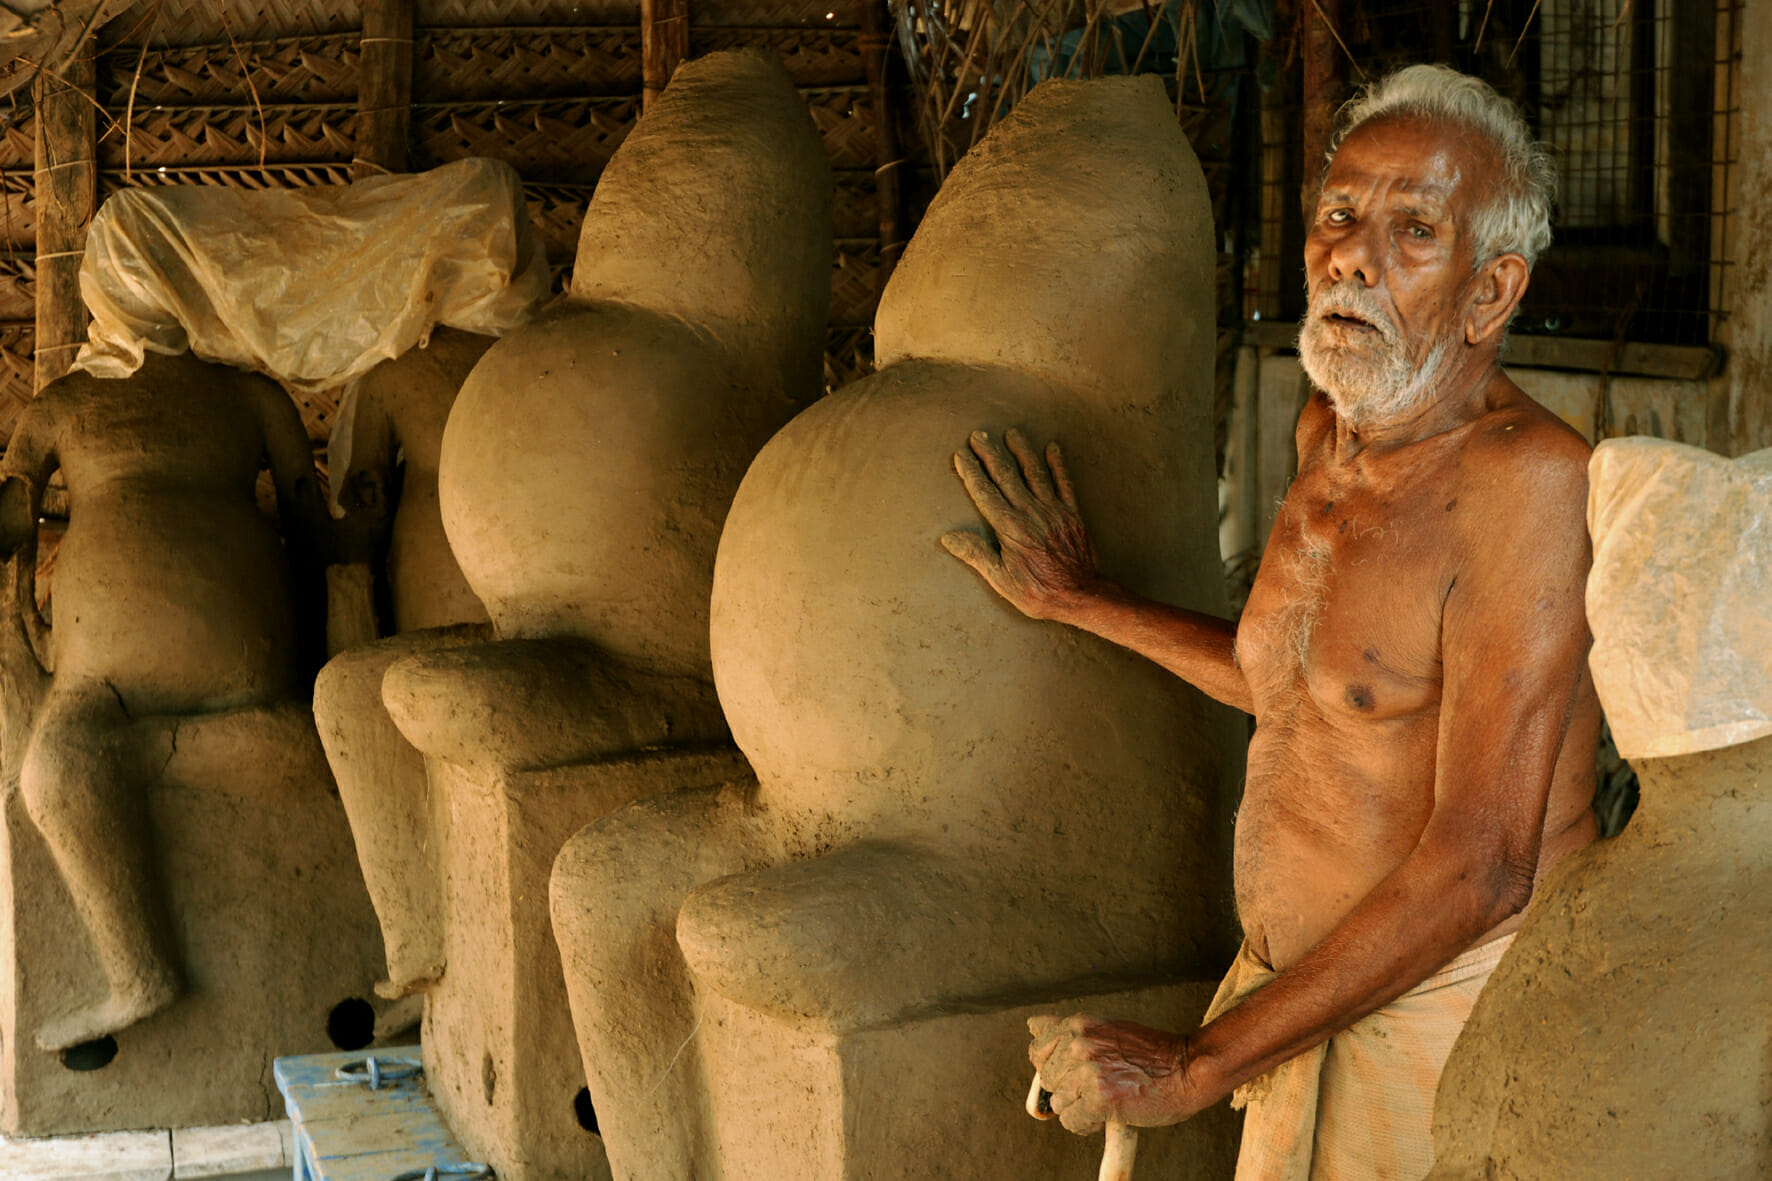 <span style="font-weight:normal;">Just as the season of Ayyanar festivals closes, the potters in Aranthangi make hundreds of clay effigies of Ganesh for the <i>Ganesh Chaturthi</i> that falls between late August and mid September. The statues are dried, never baked, for they will ultimately be immersed in a body of water (river, lake, sea...) where their decomposition is immediate and total.</span>